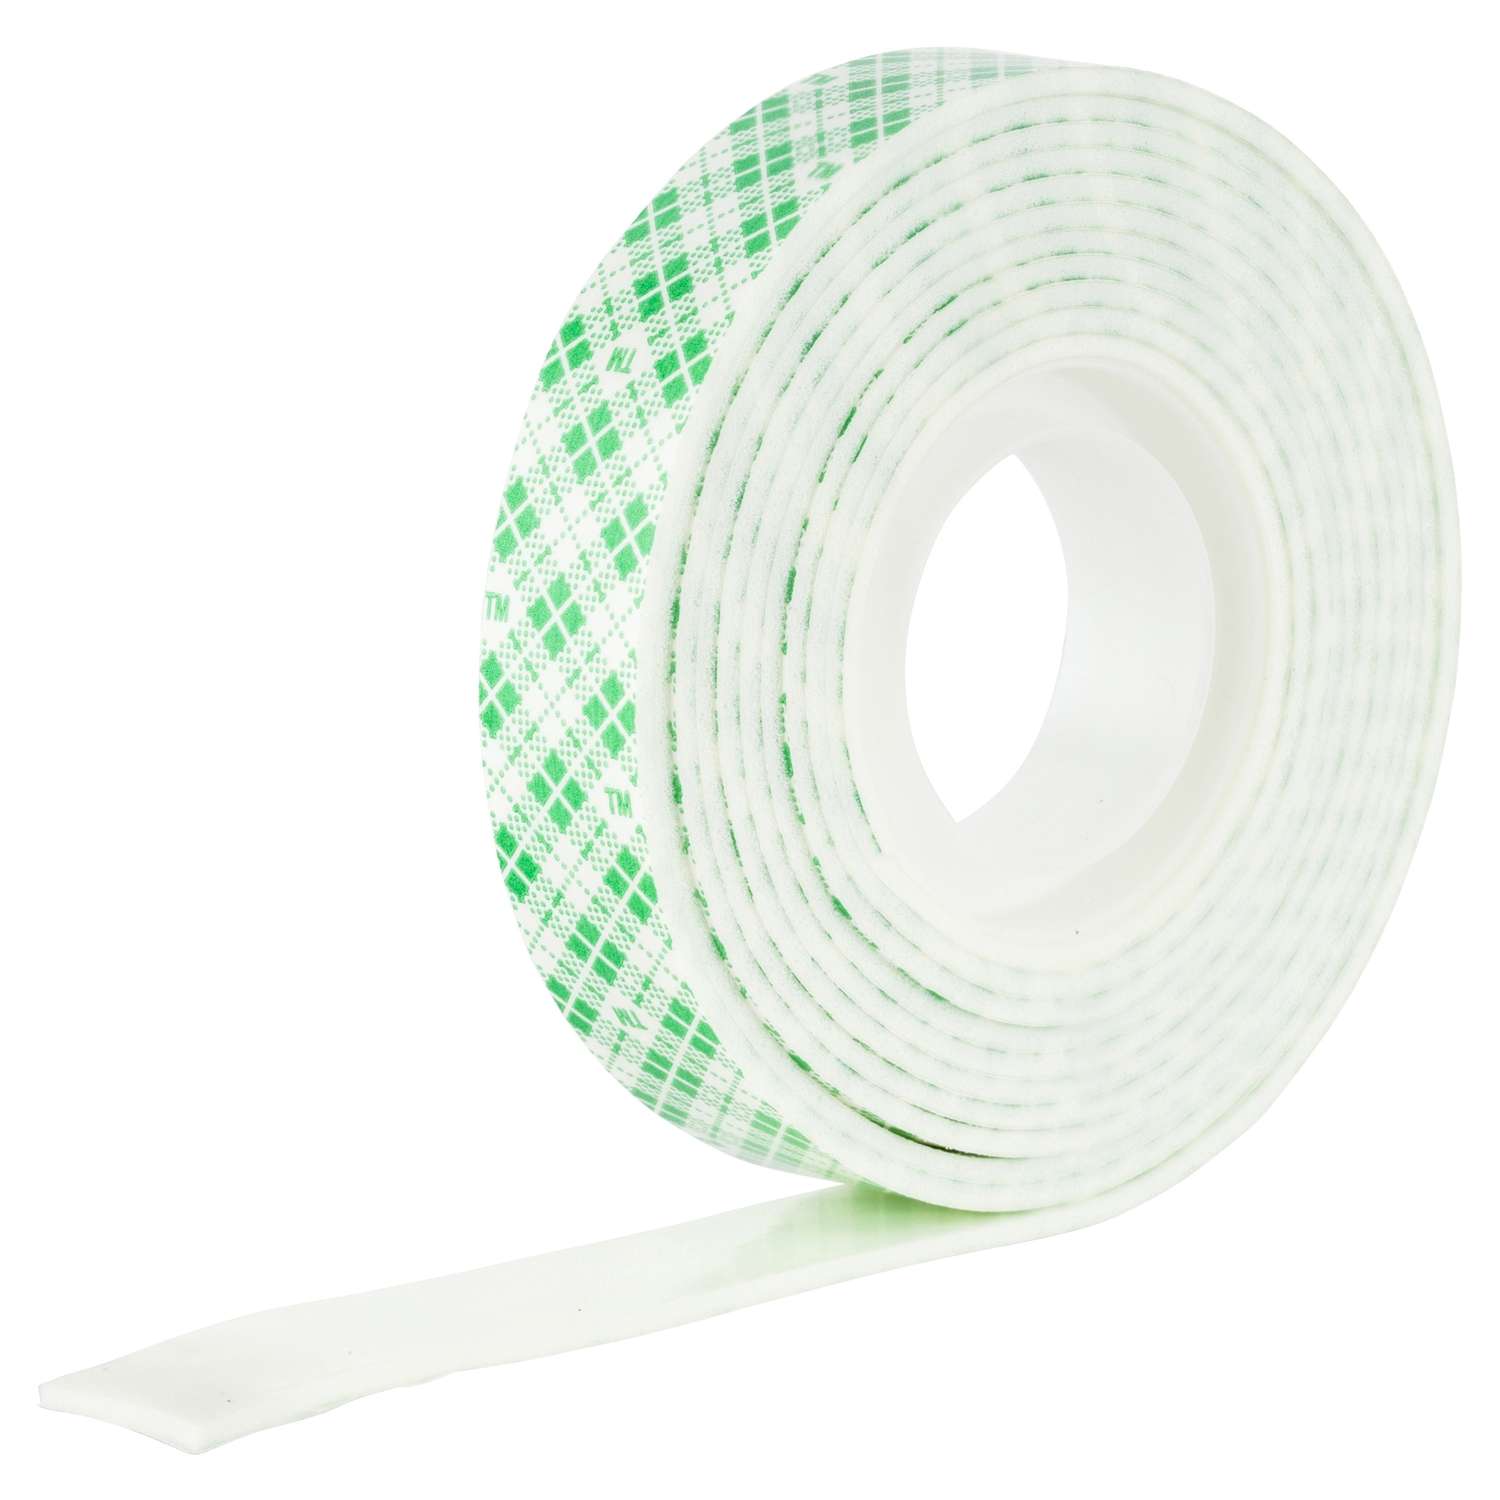 Dry double-sided tape for adhesion of wet tissues and devices